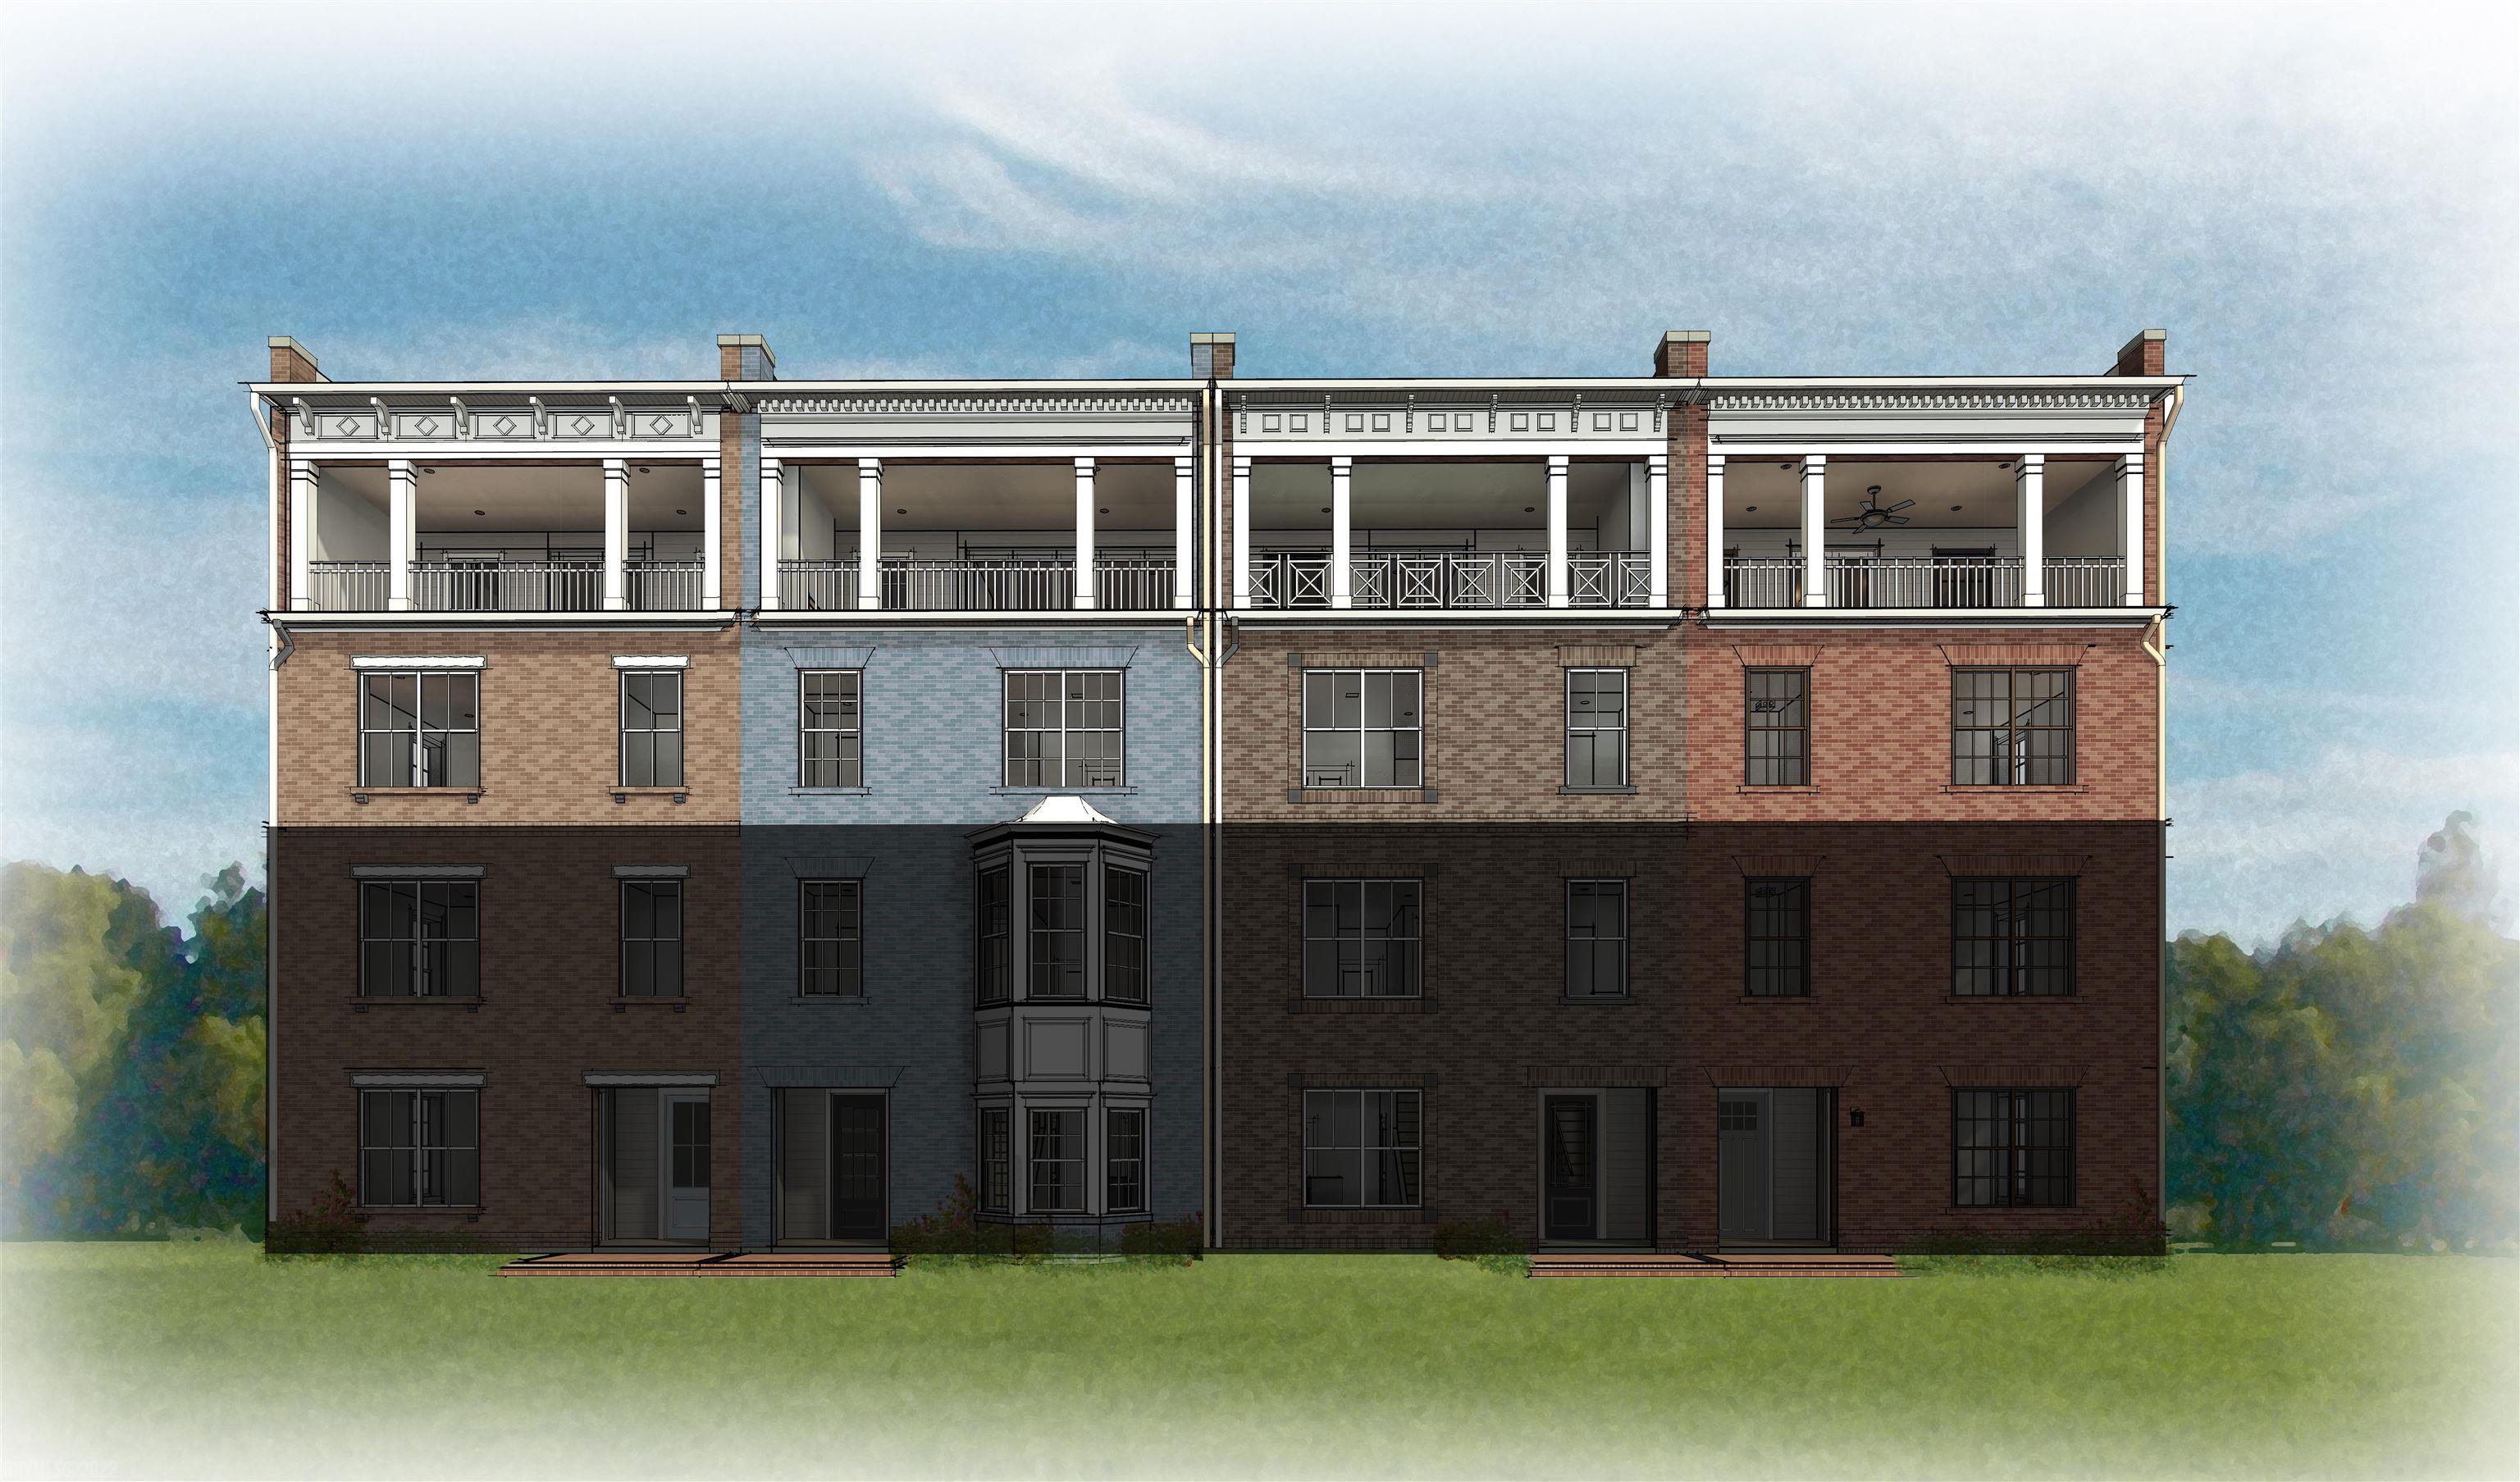 Introducing the new McKinney 2-level Condo in Midtown! Features 3 bedrooms, 2.5 baths, upper level walk out terrace, elevator, and spacious open plan with rear entry garage. Well appointed finishes throughout the home ALL within walking distance to downtown Blacksburg and Virginia Tech!